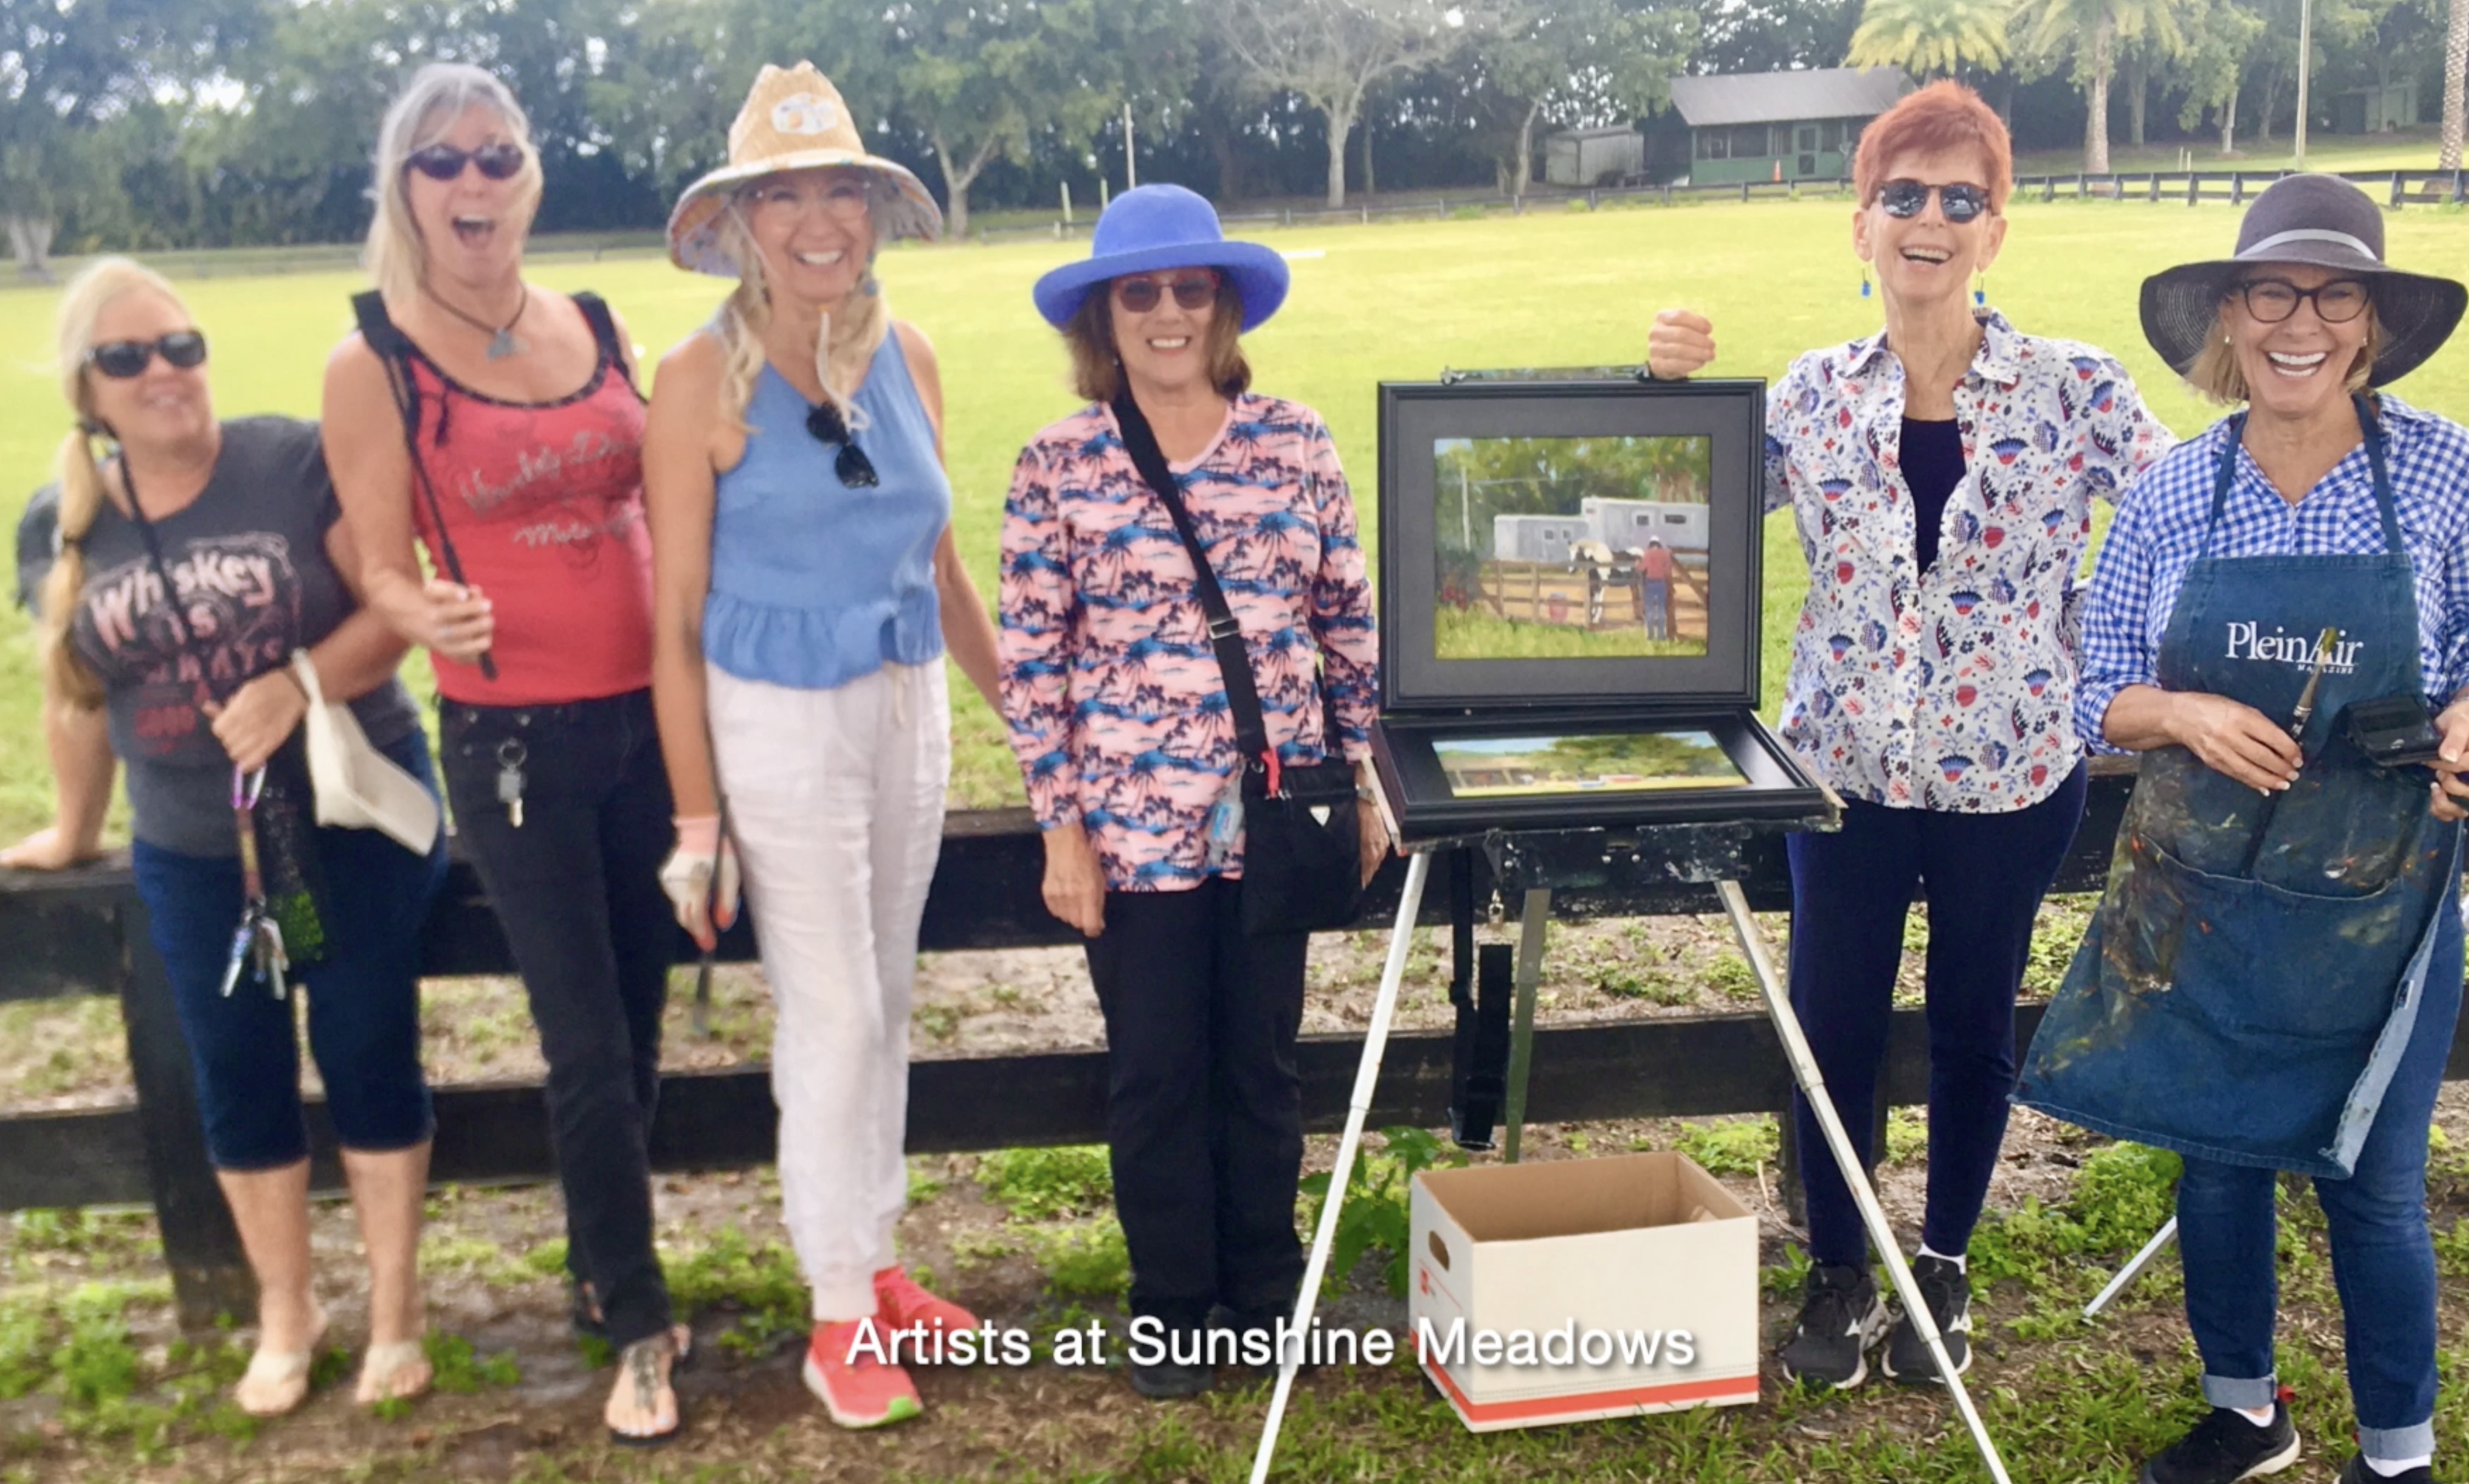 Artists at Sunshine Meadows